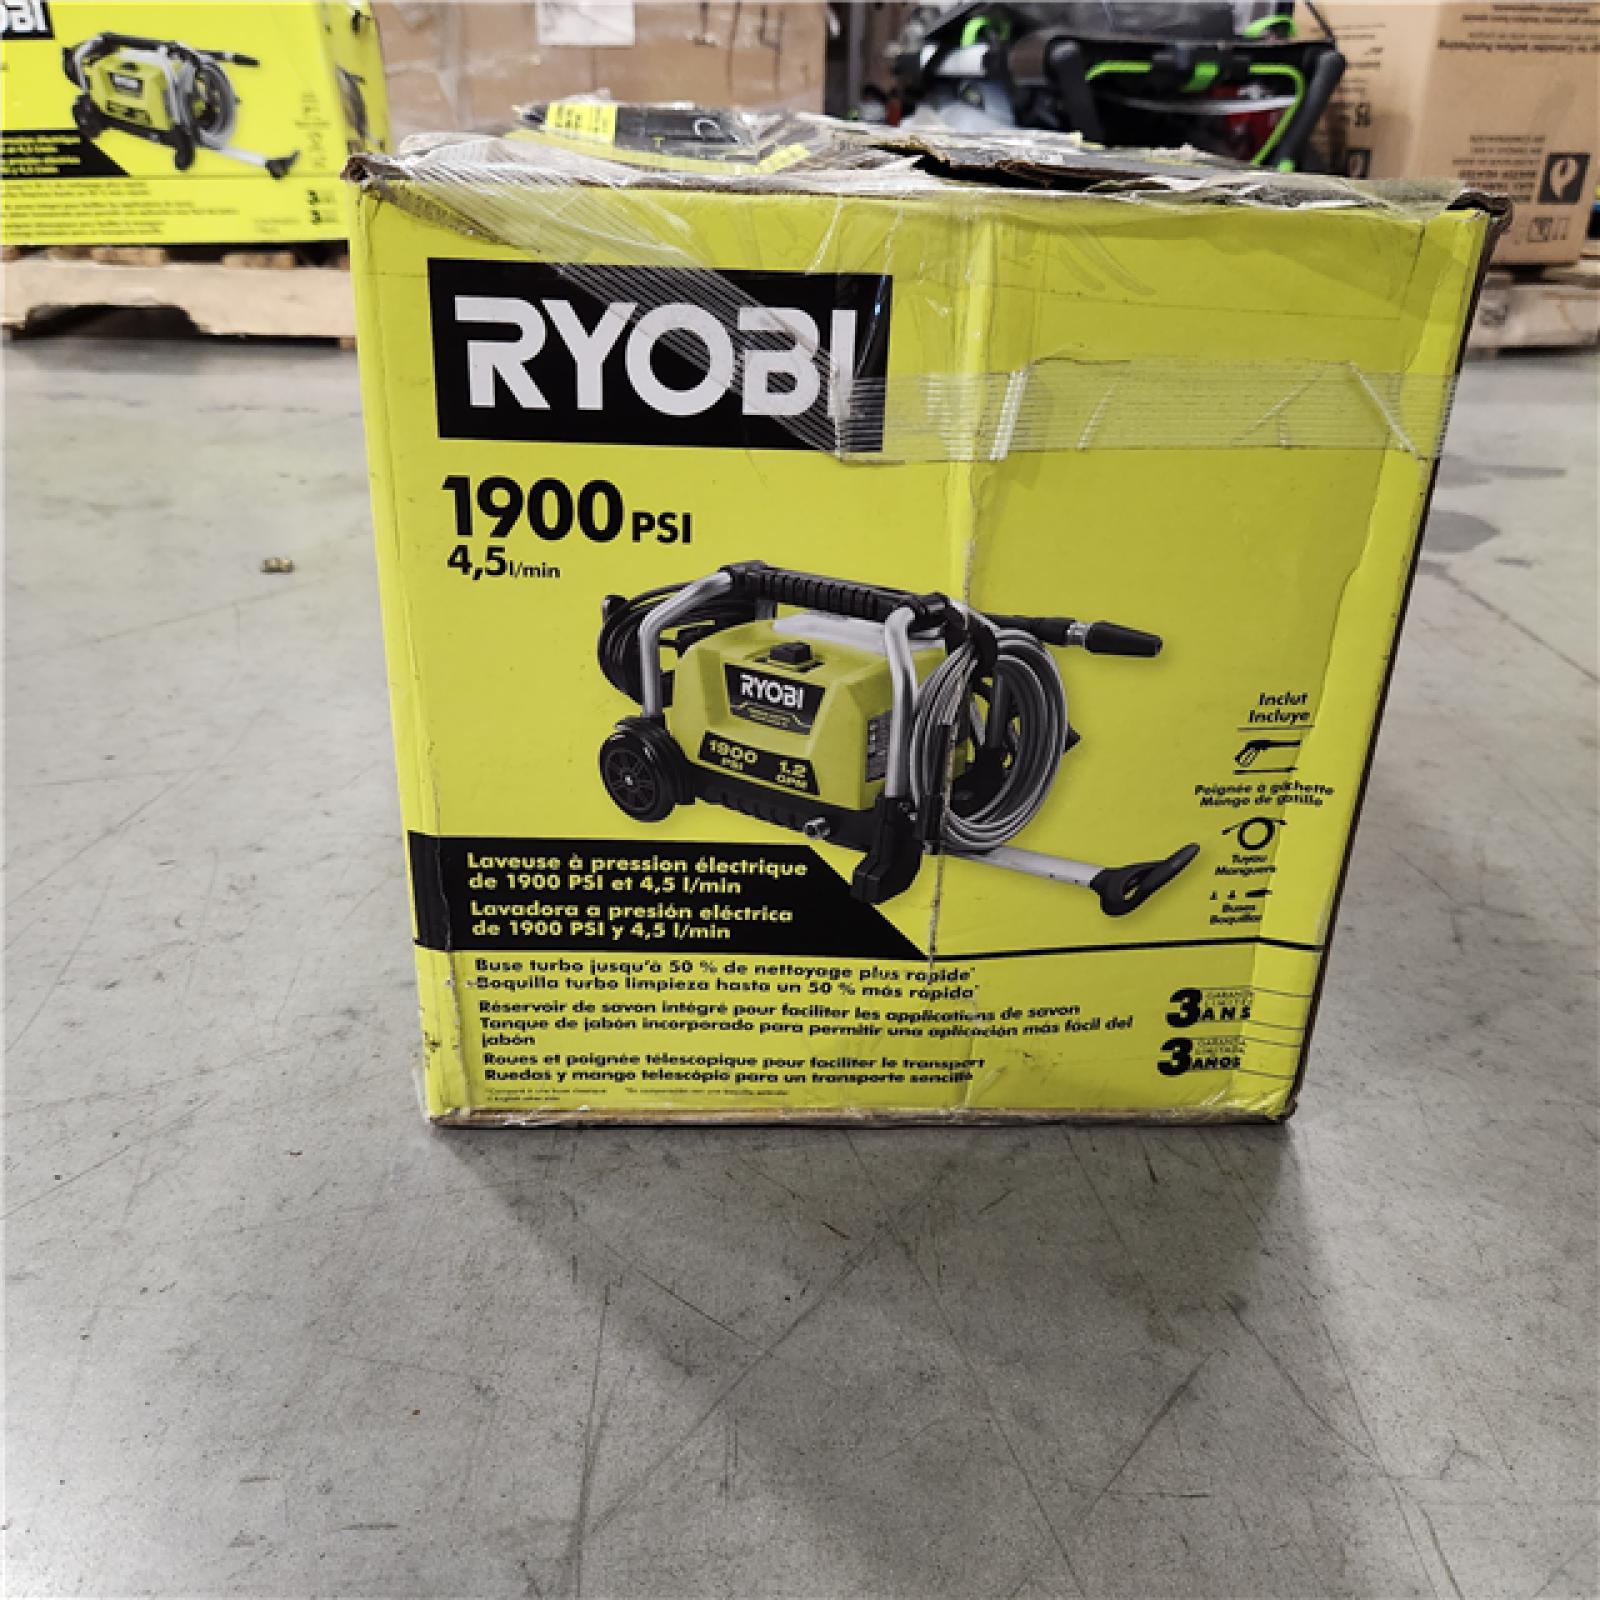 NEW - RYOBI 1900 PSI 1.2 GPM Cold Water Wheeled Corded Electric Pressure Washer